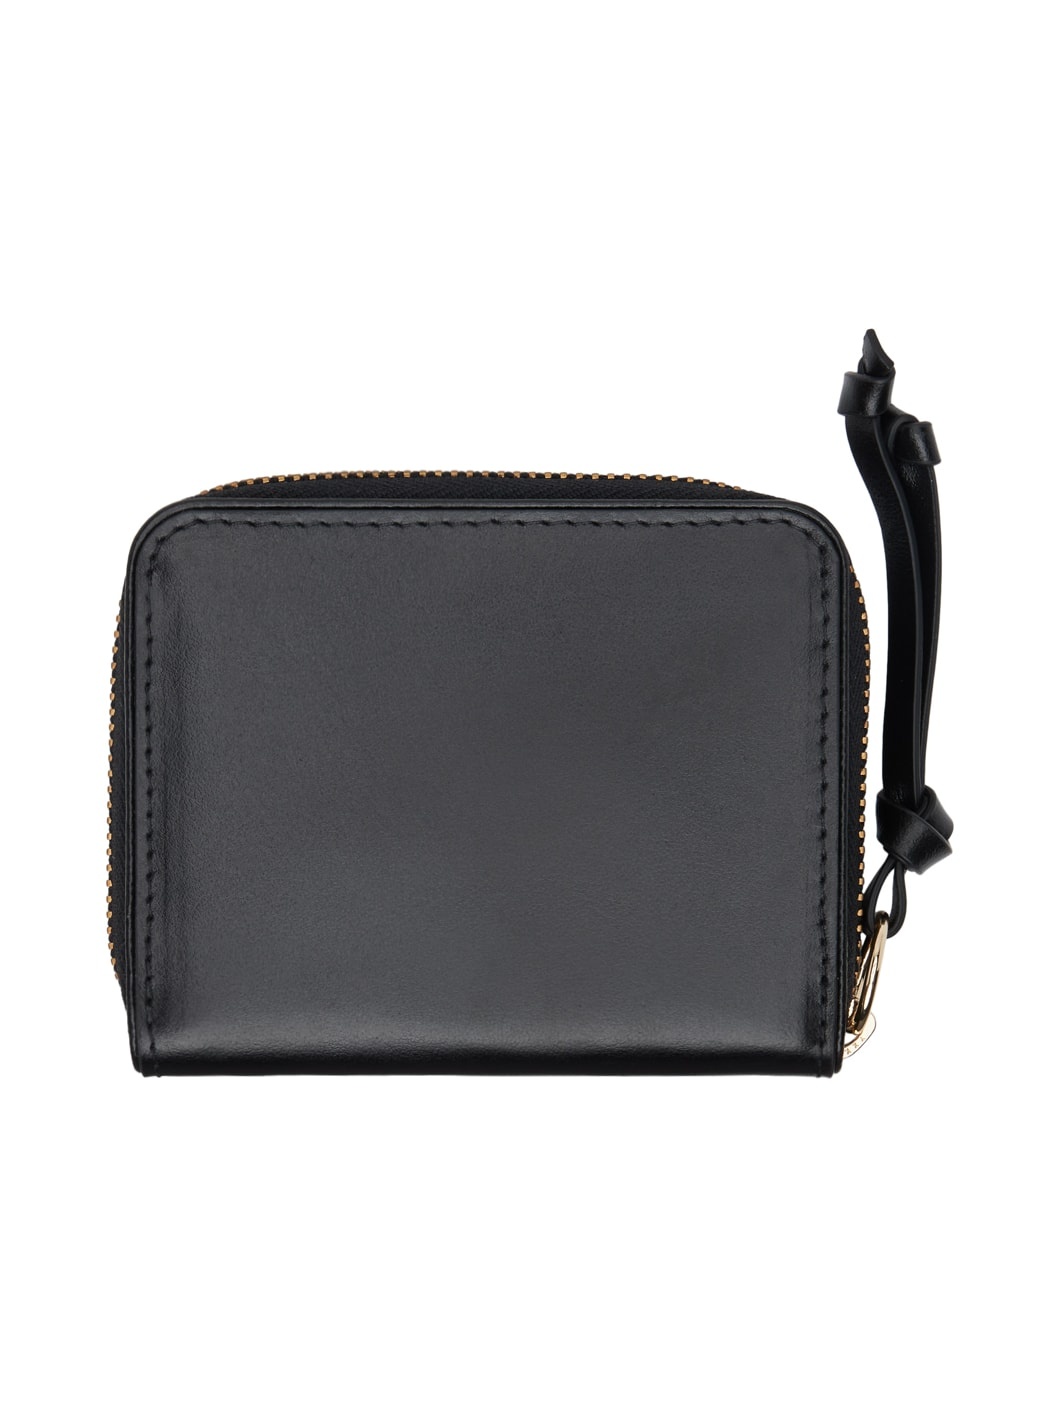 Black Square Leather Wallet - 2